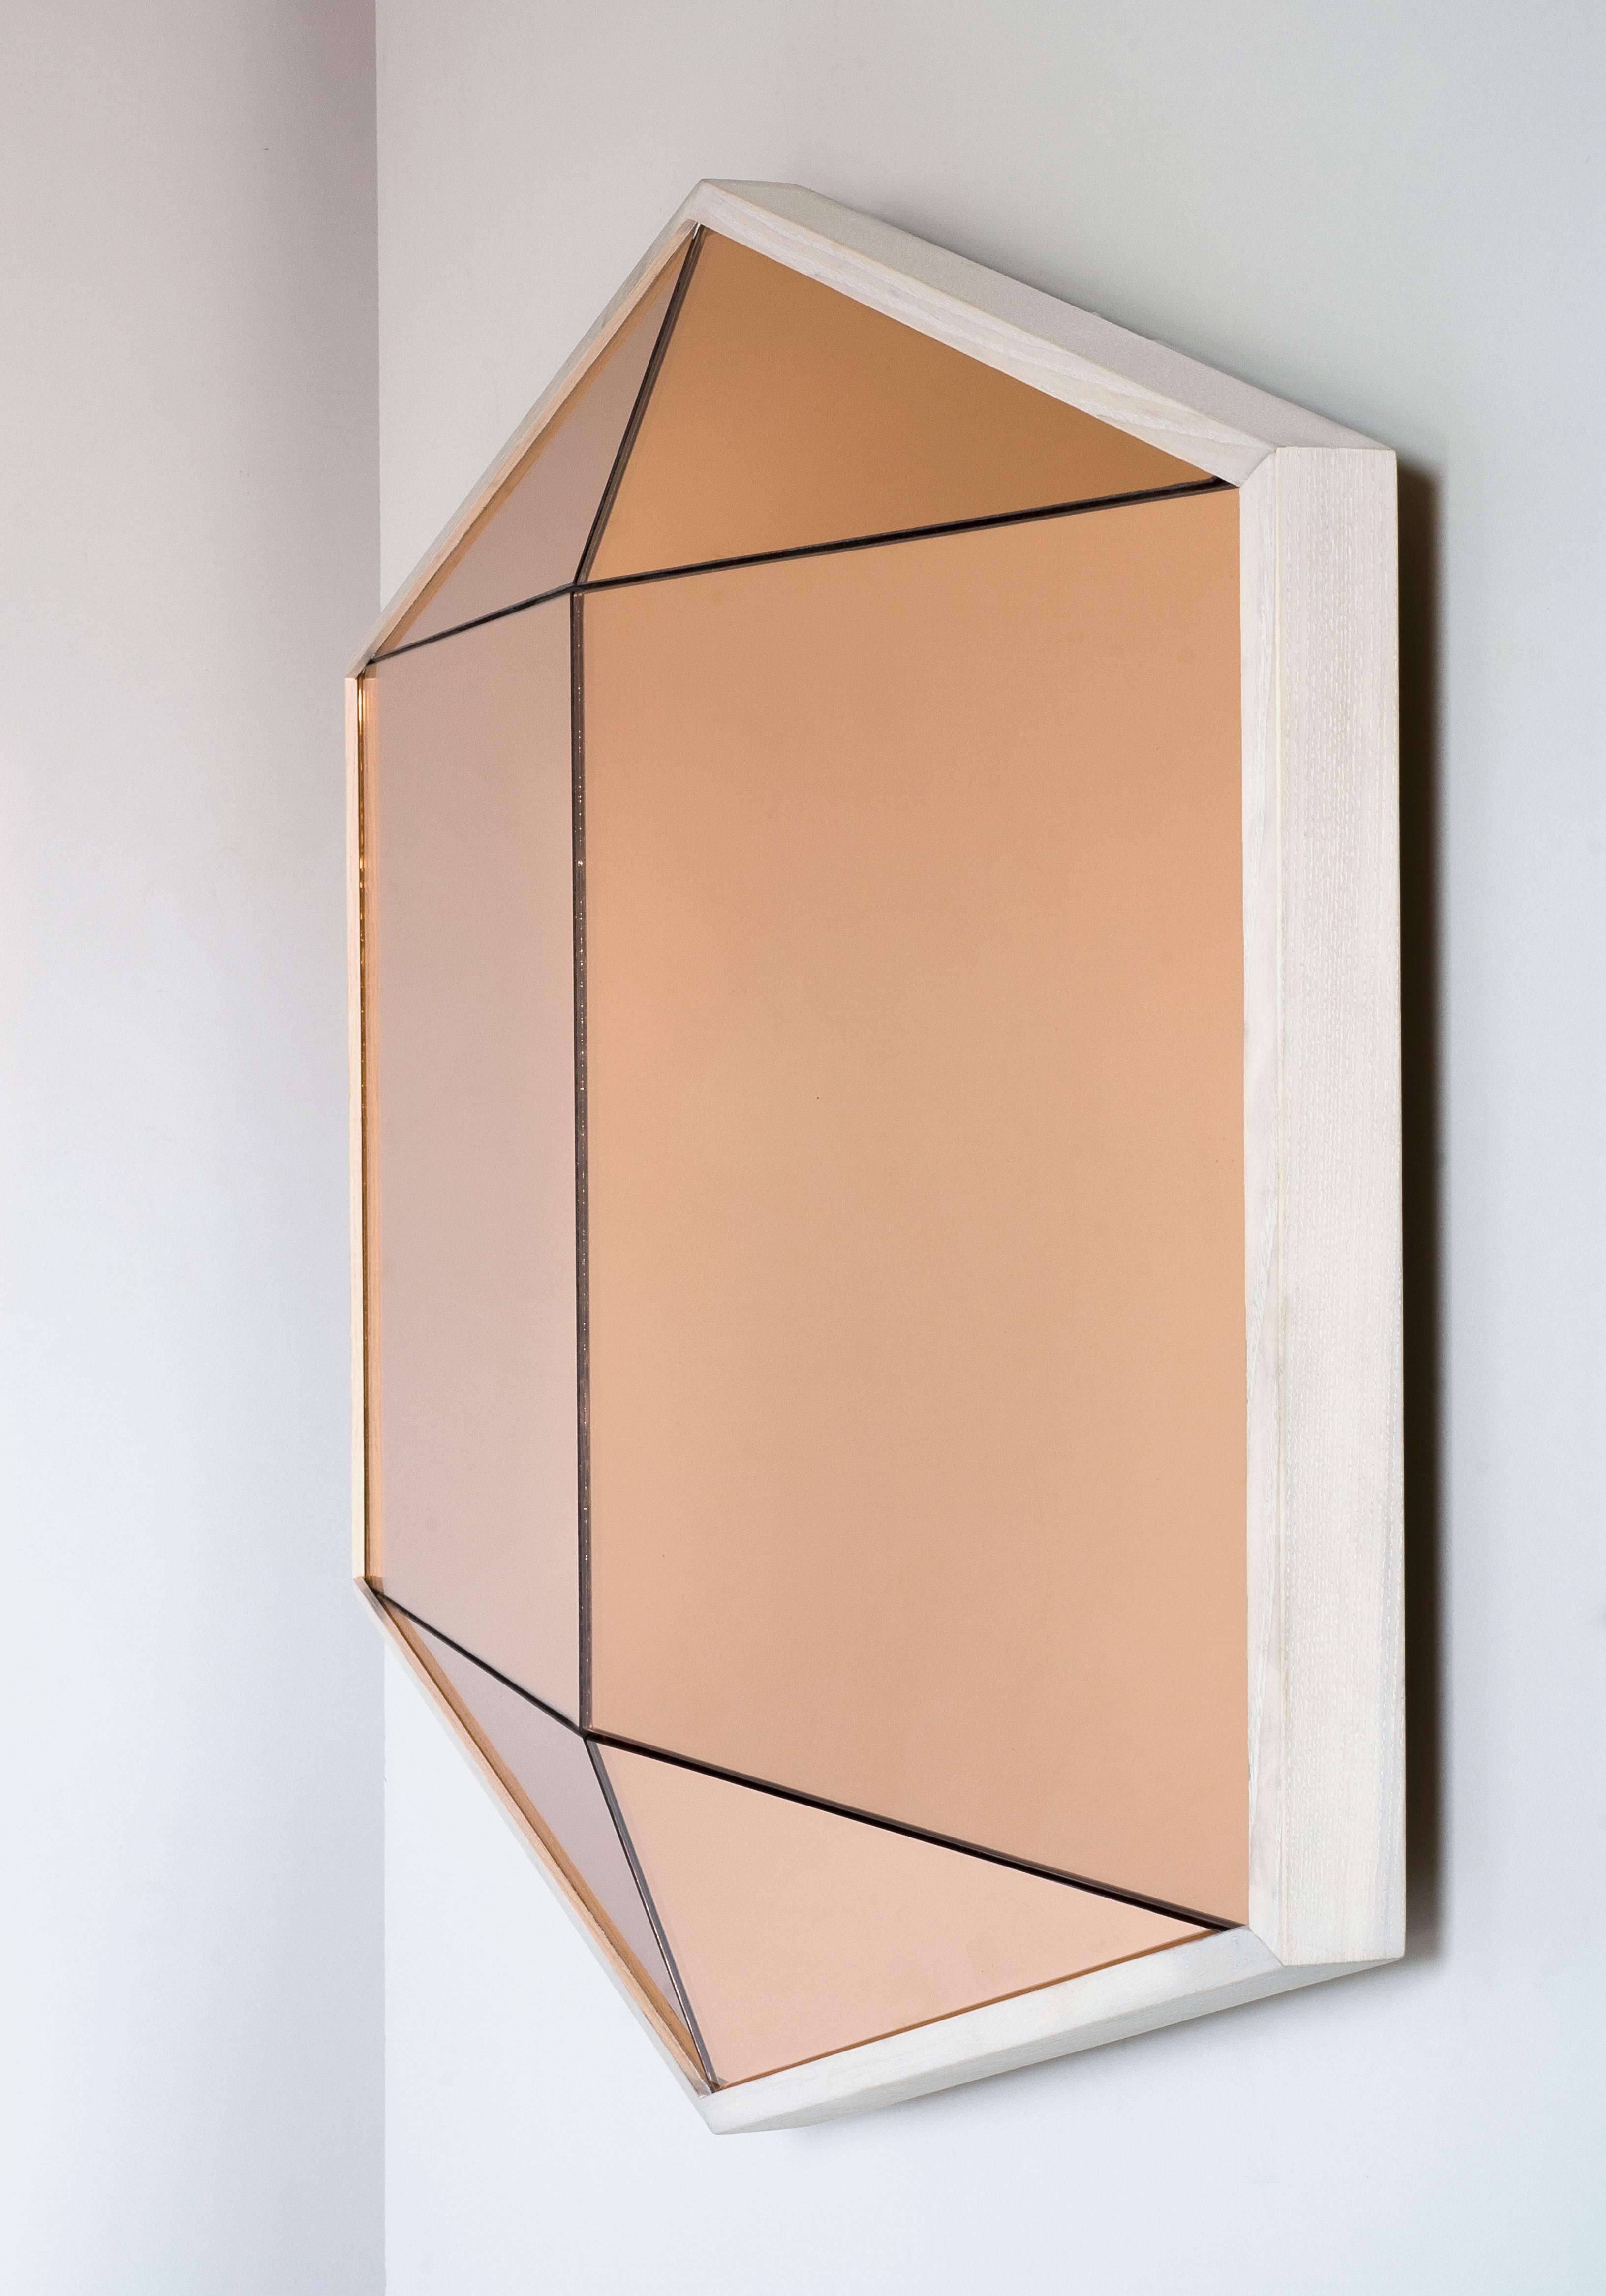 Built in colored mirror with a hardwood frame, the Gem mirror offers a bold reflective surface. Six faceted panes of glass are a trick to the eye walk past and one's reflection seems to appear and disappear. 

The gem mirror was featured in the